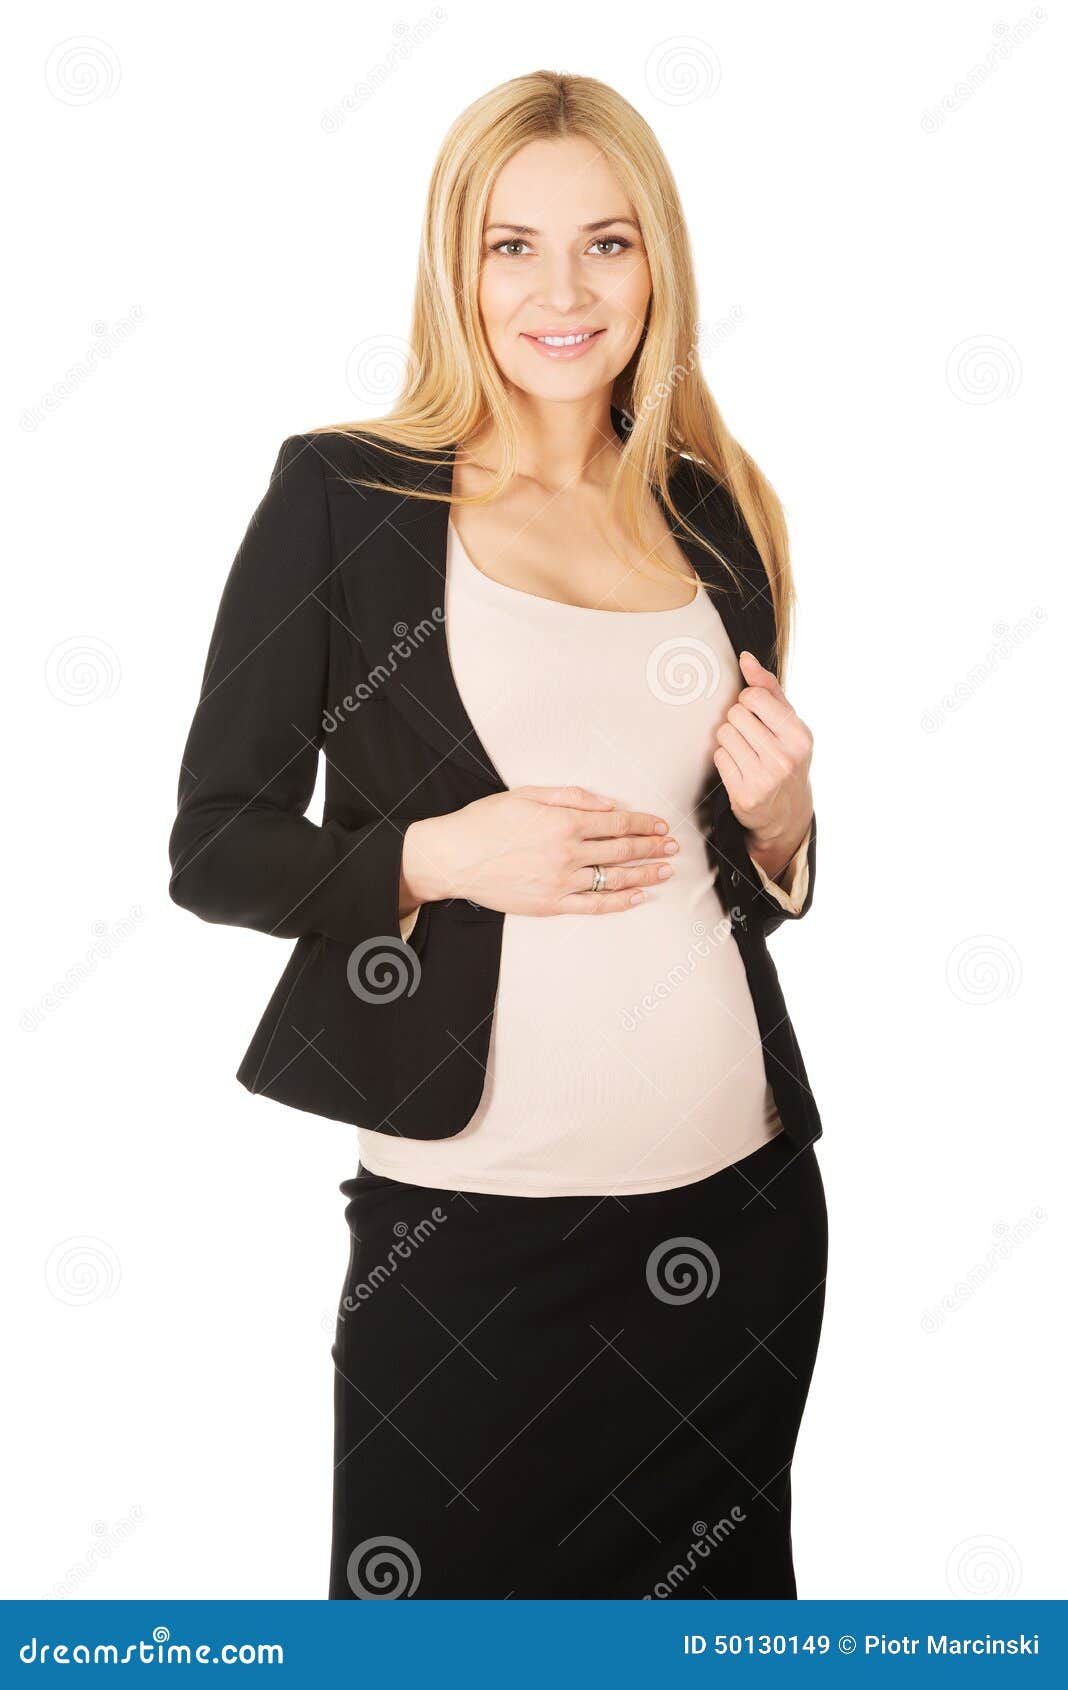 Pregnant Woman in Business Suit. Stock Image - Image of people, care ...